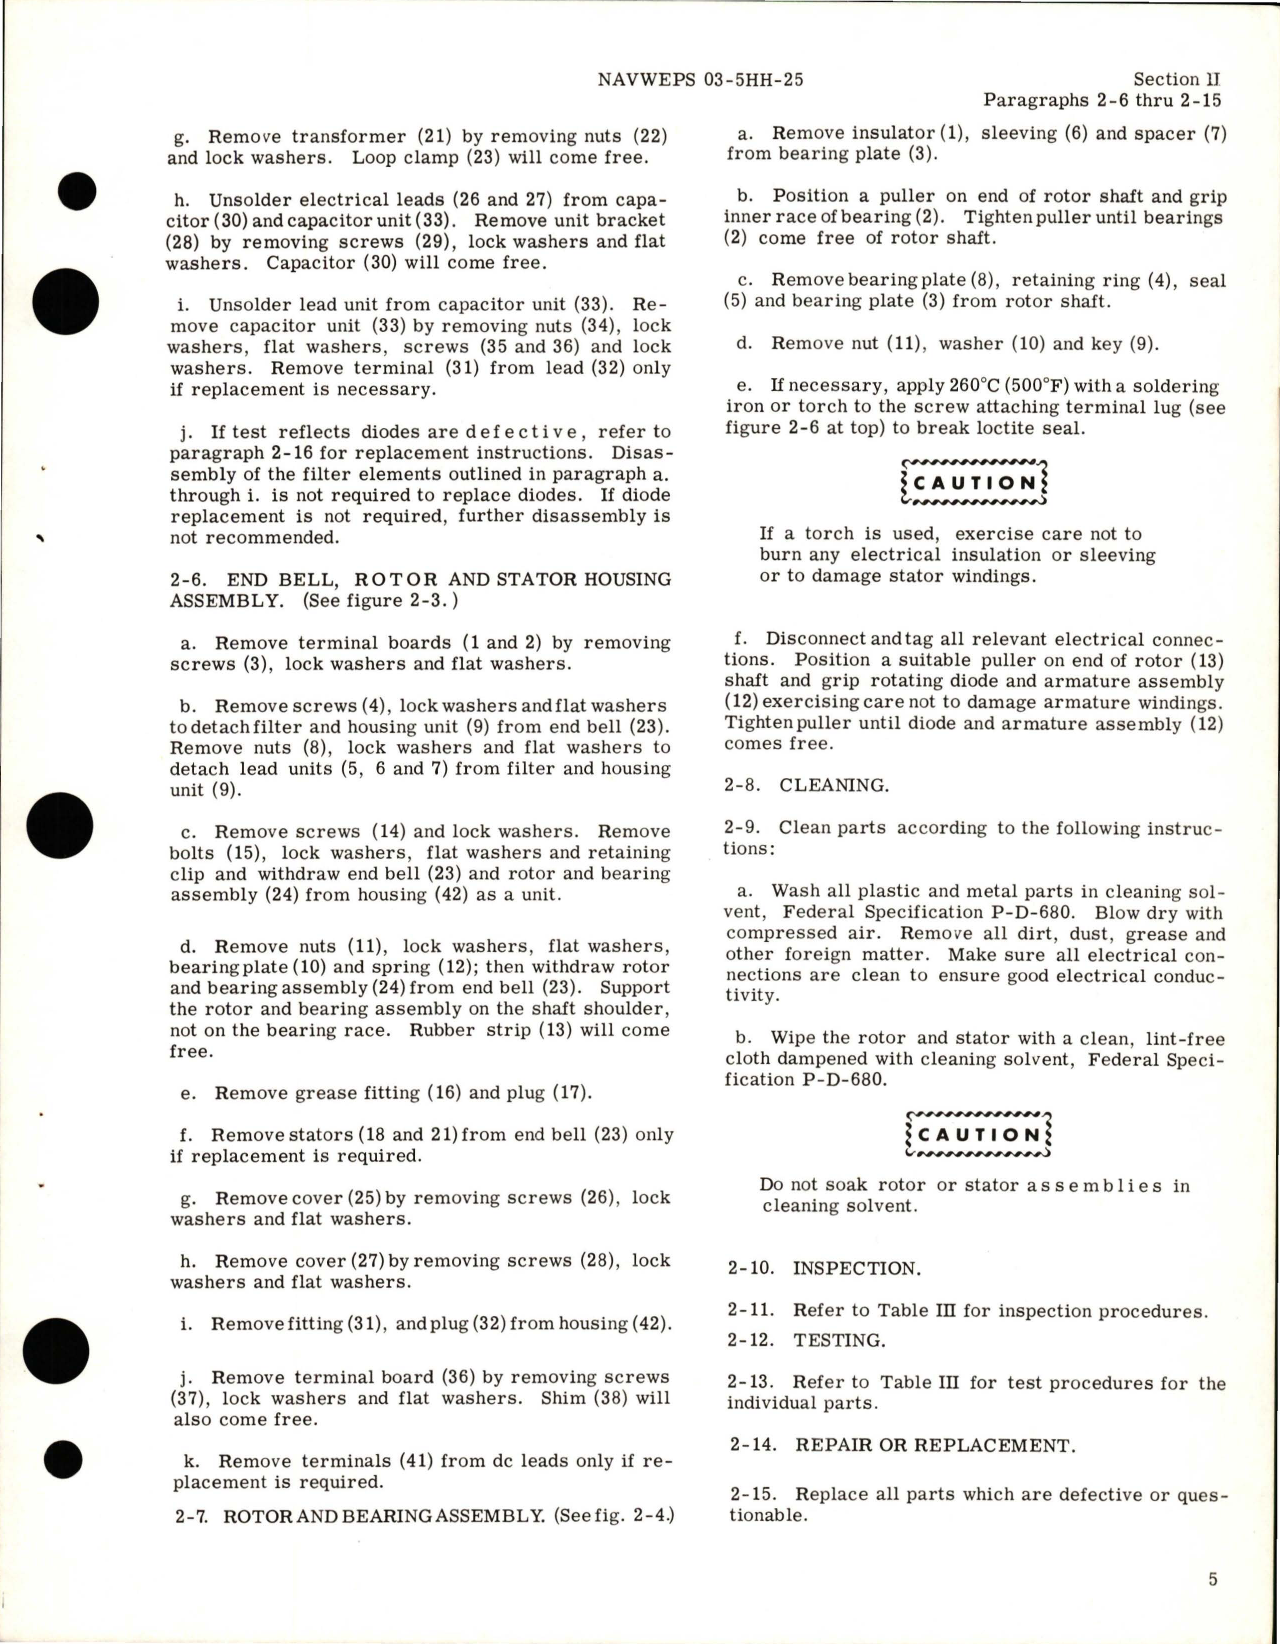 Sample page 9 from AirCorps Library document: Overhaul Instructions for AC-DC Generator - Part AGH173-1, AGH173-1MA and AGH173-2